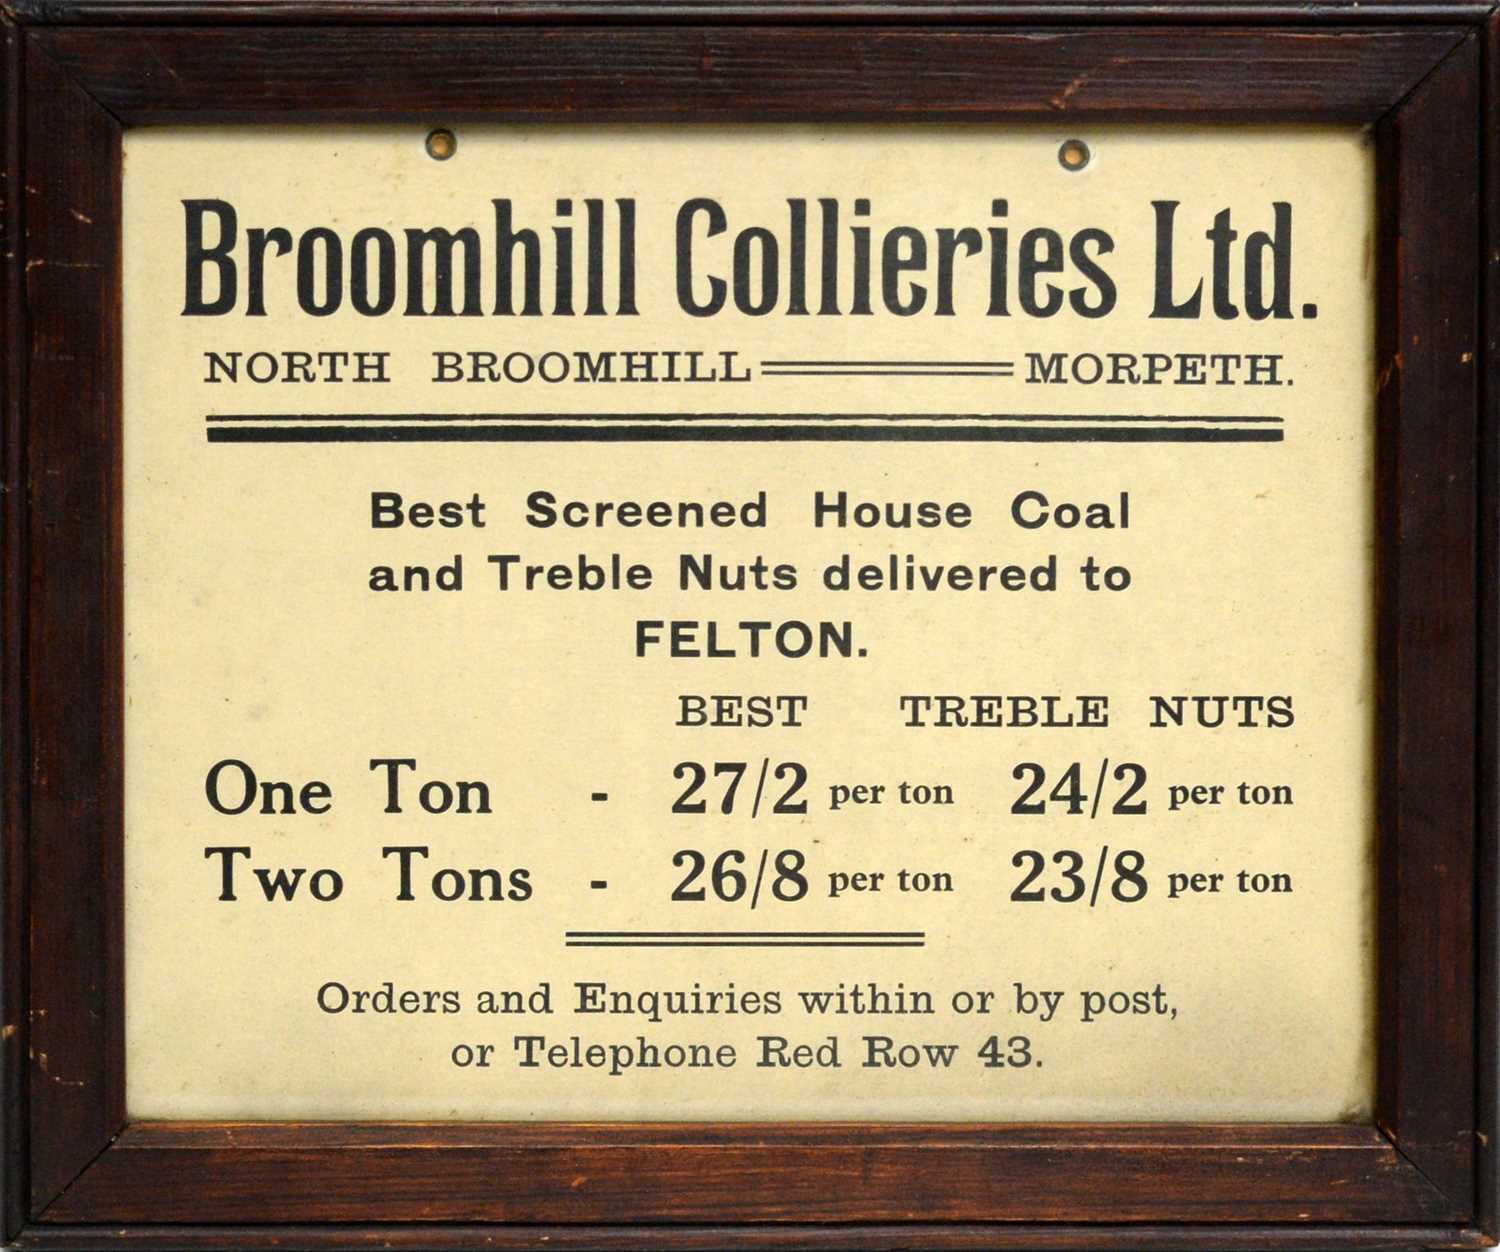 Lot 702 - 20th Century - A coal advertisement for Broomhill Collieries of Morpeth | lithograph